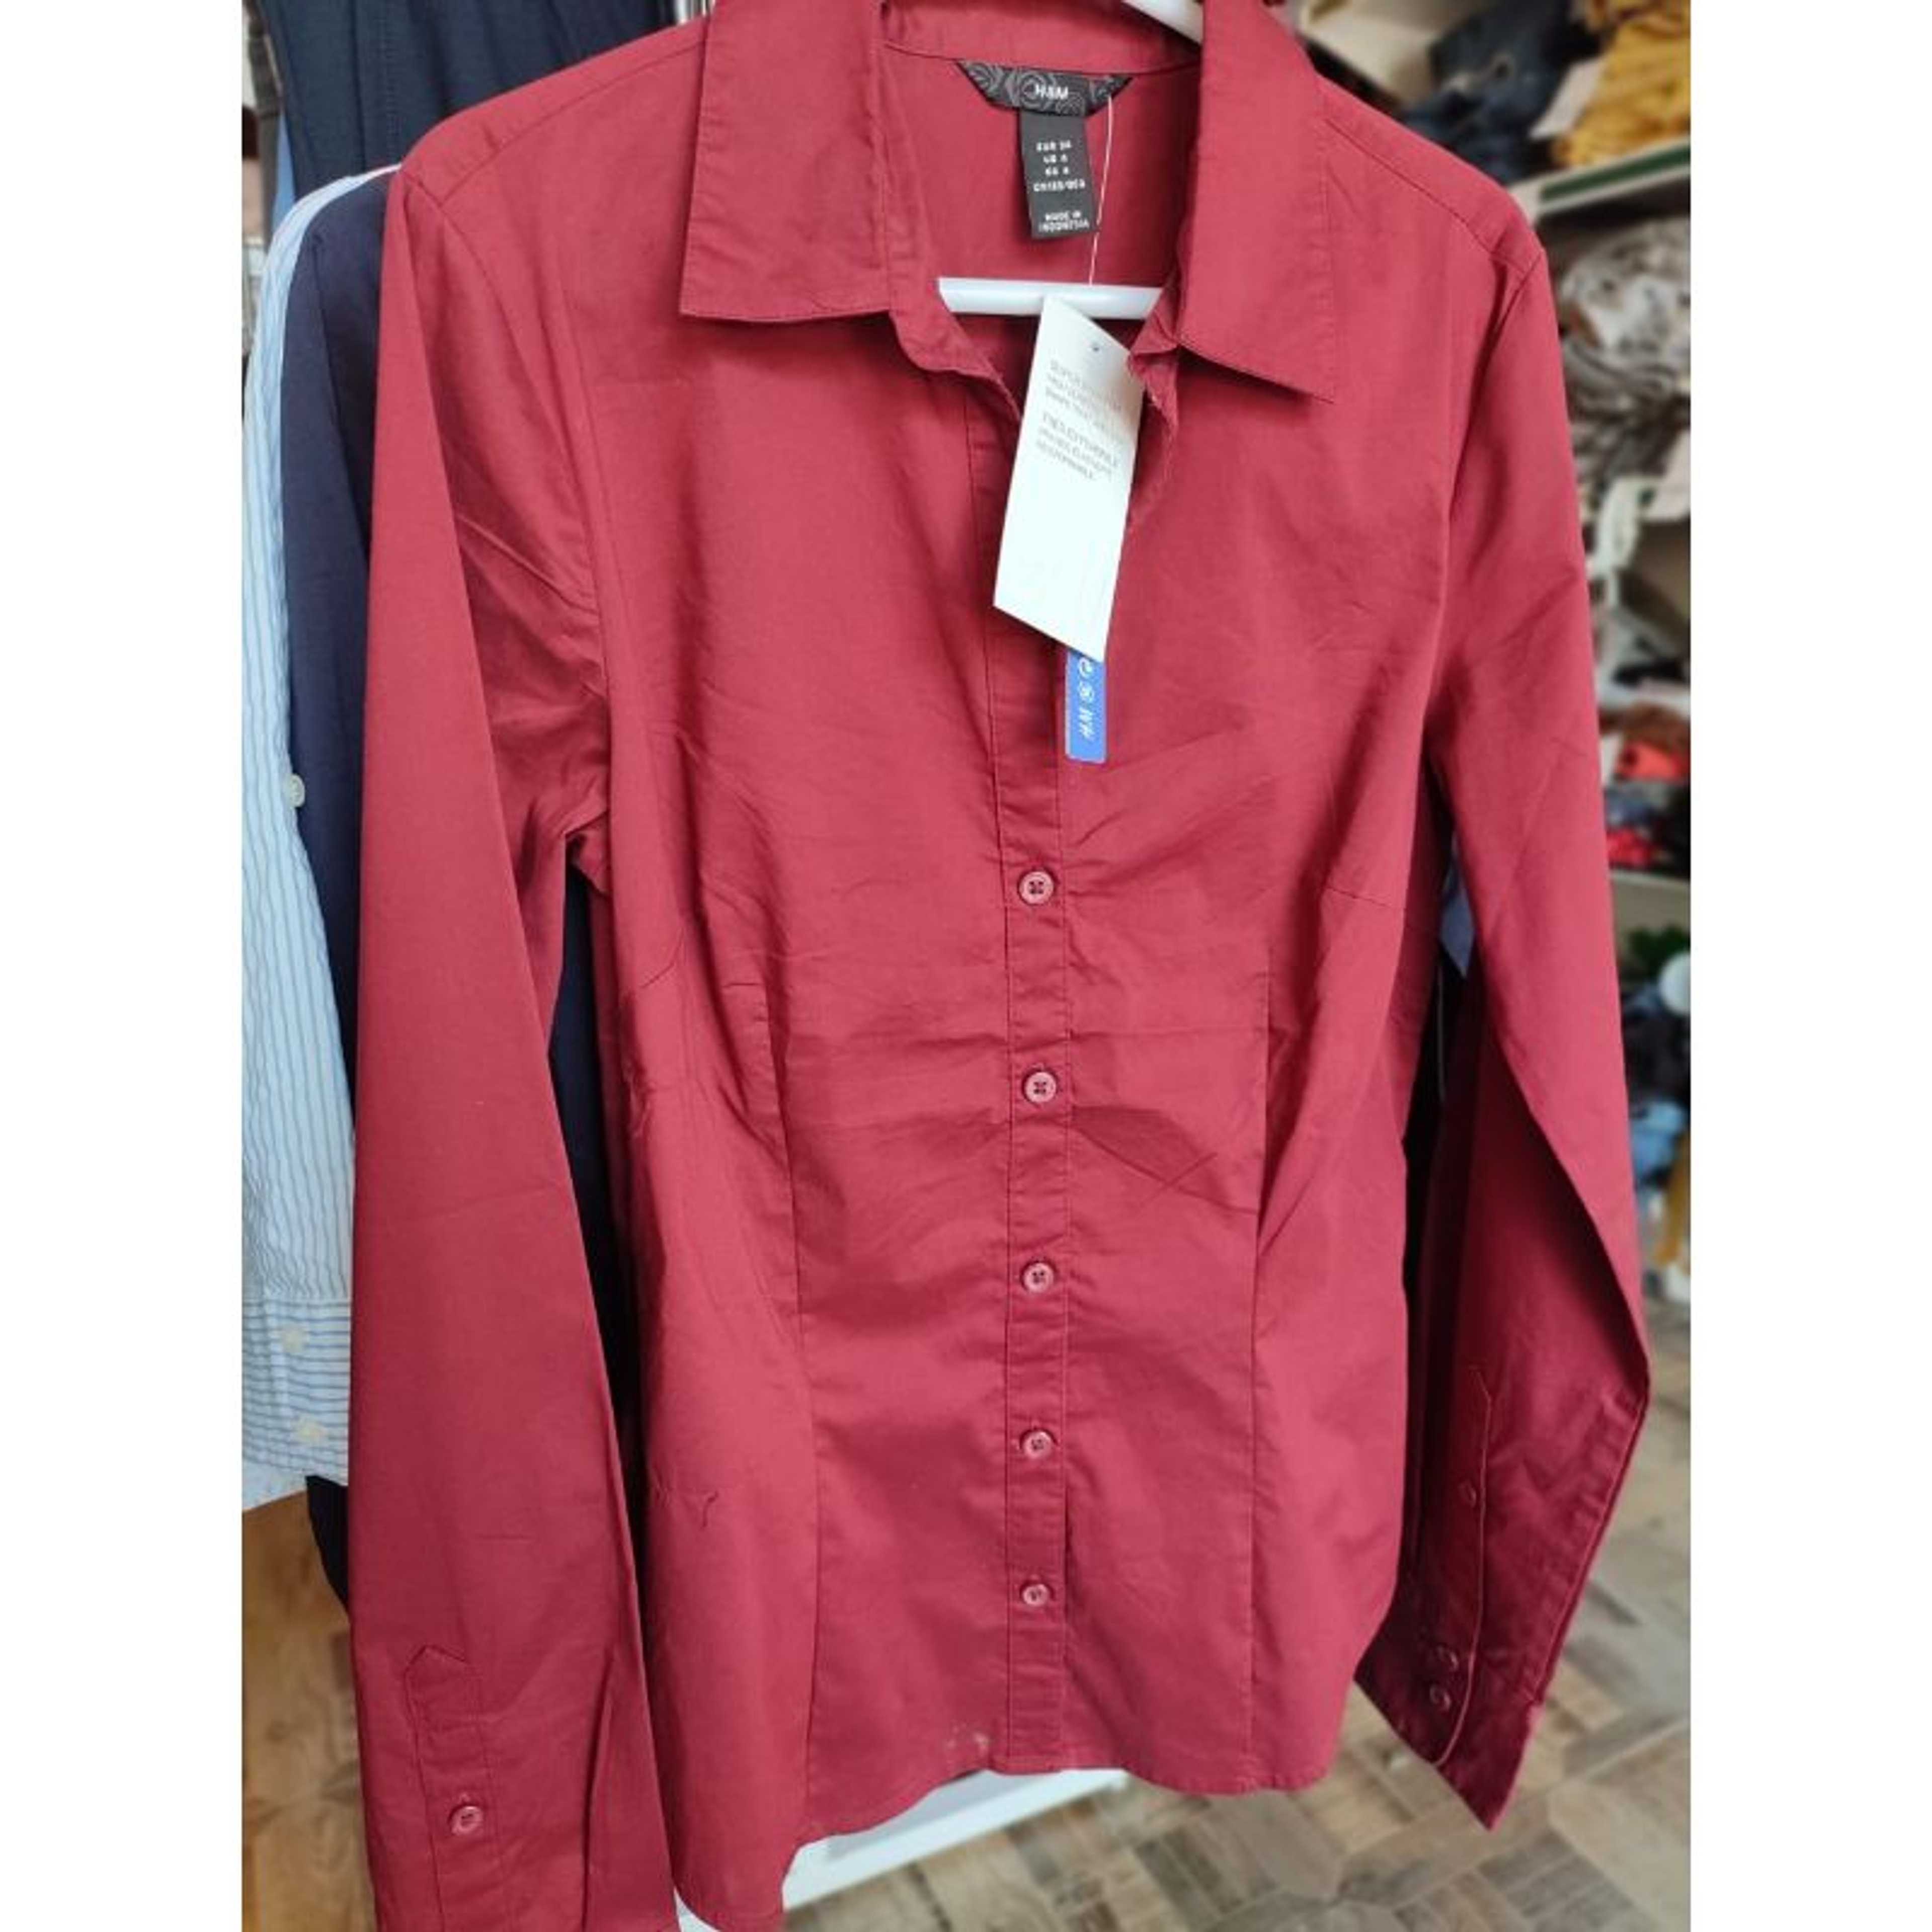 Girls formal shirts in Red color